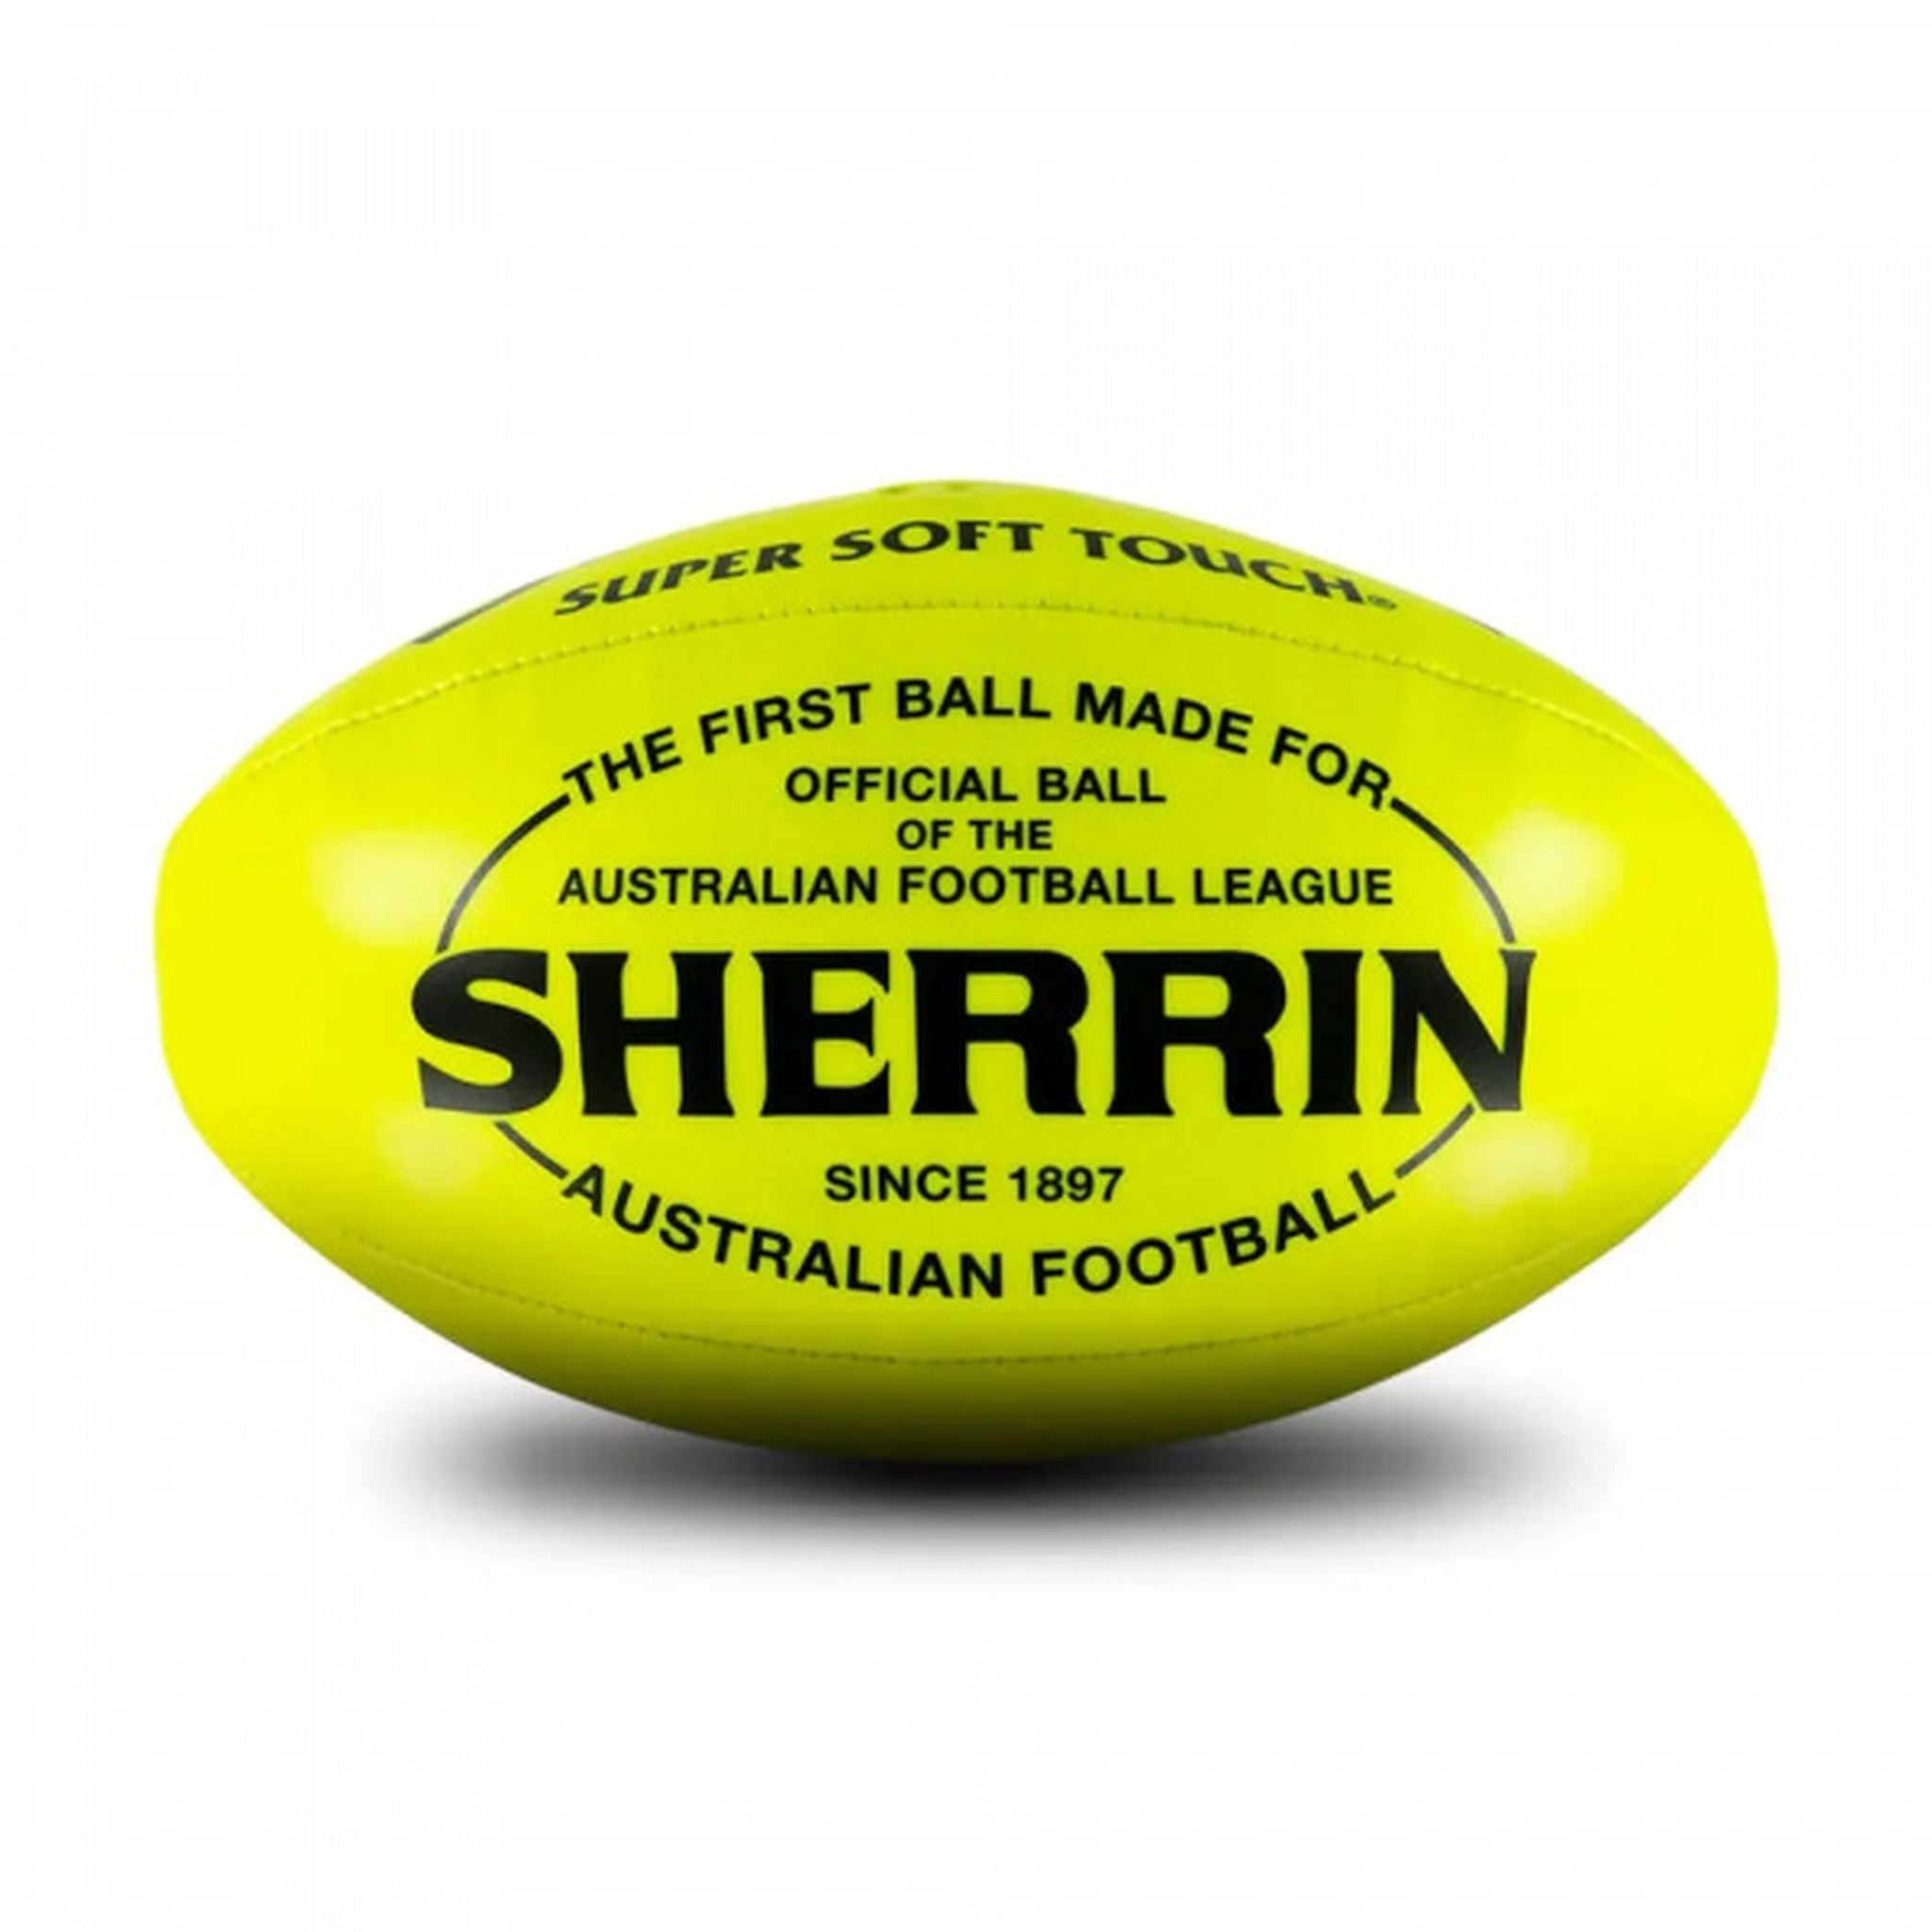 Sherrin Super Soft Touch Vision Impaired Football